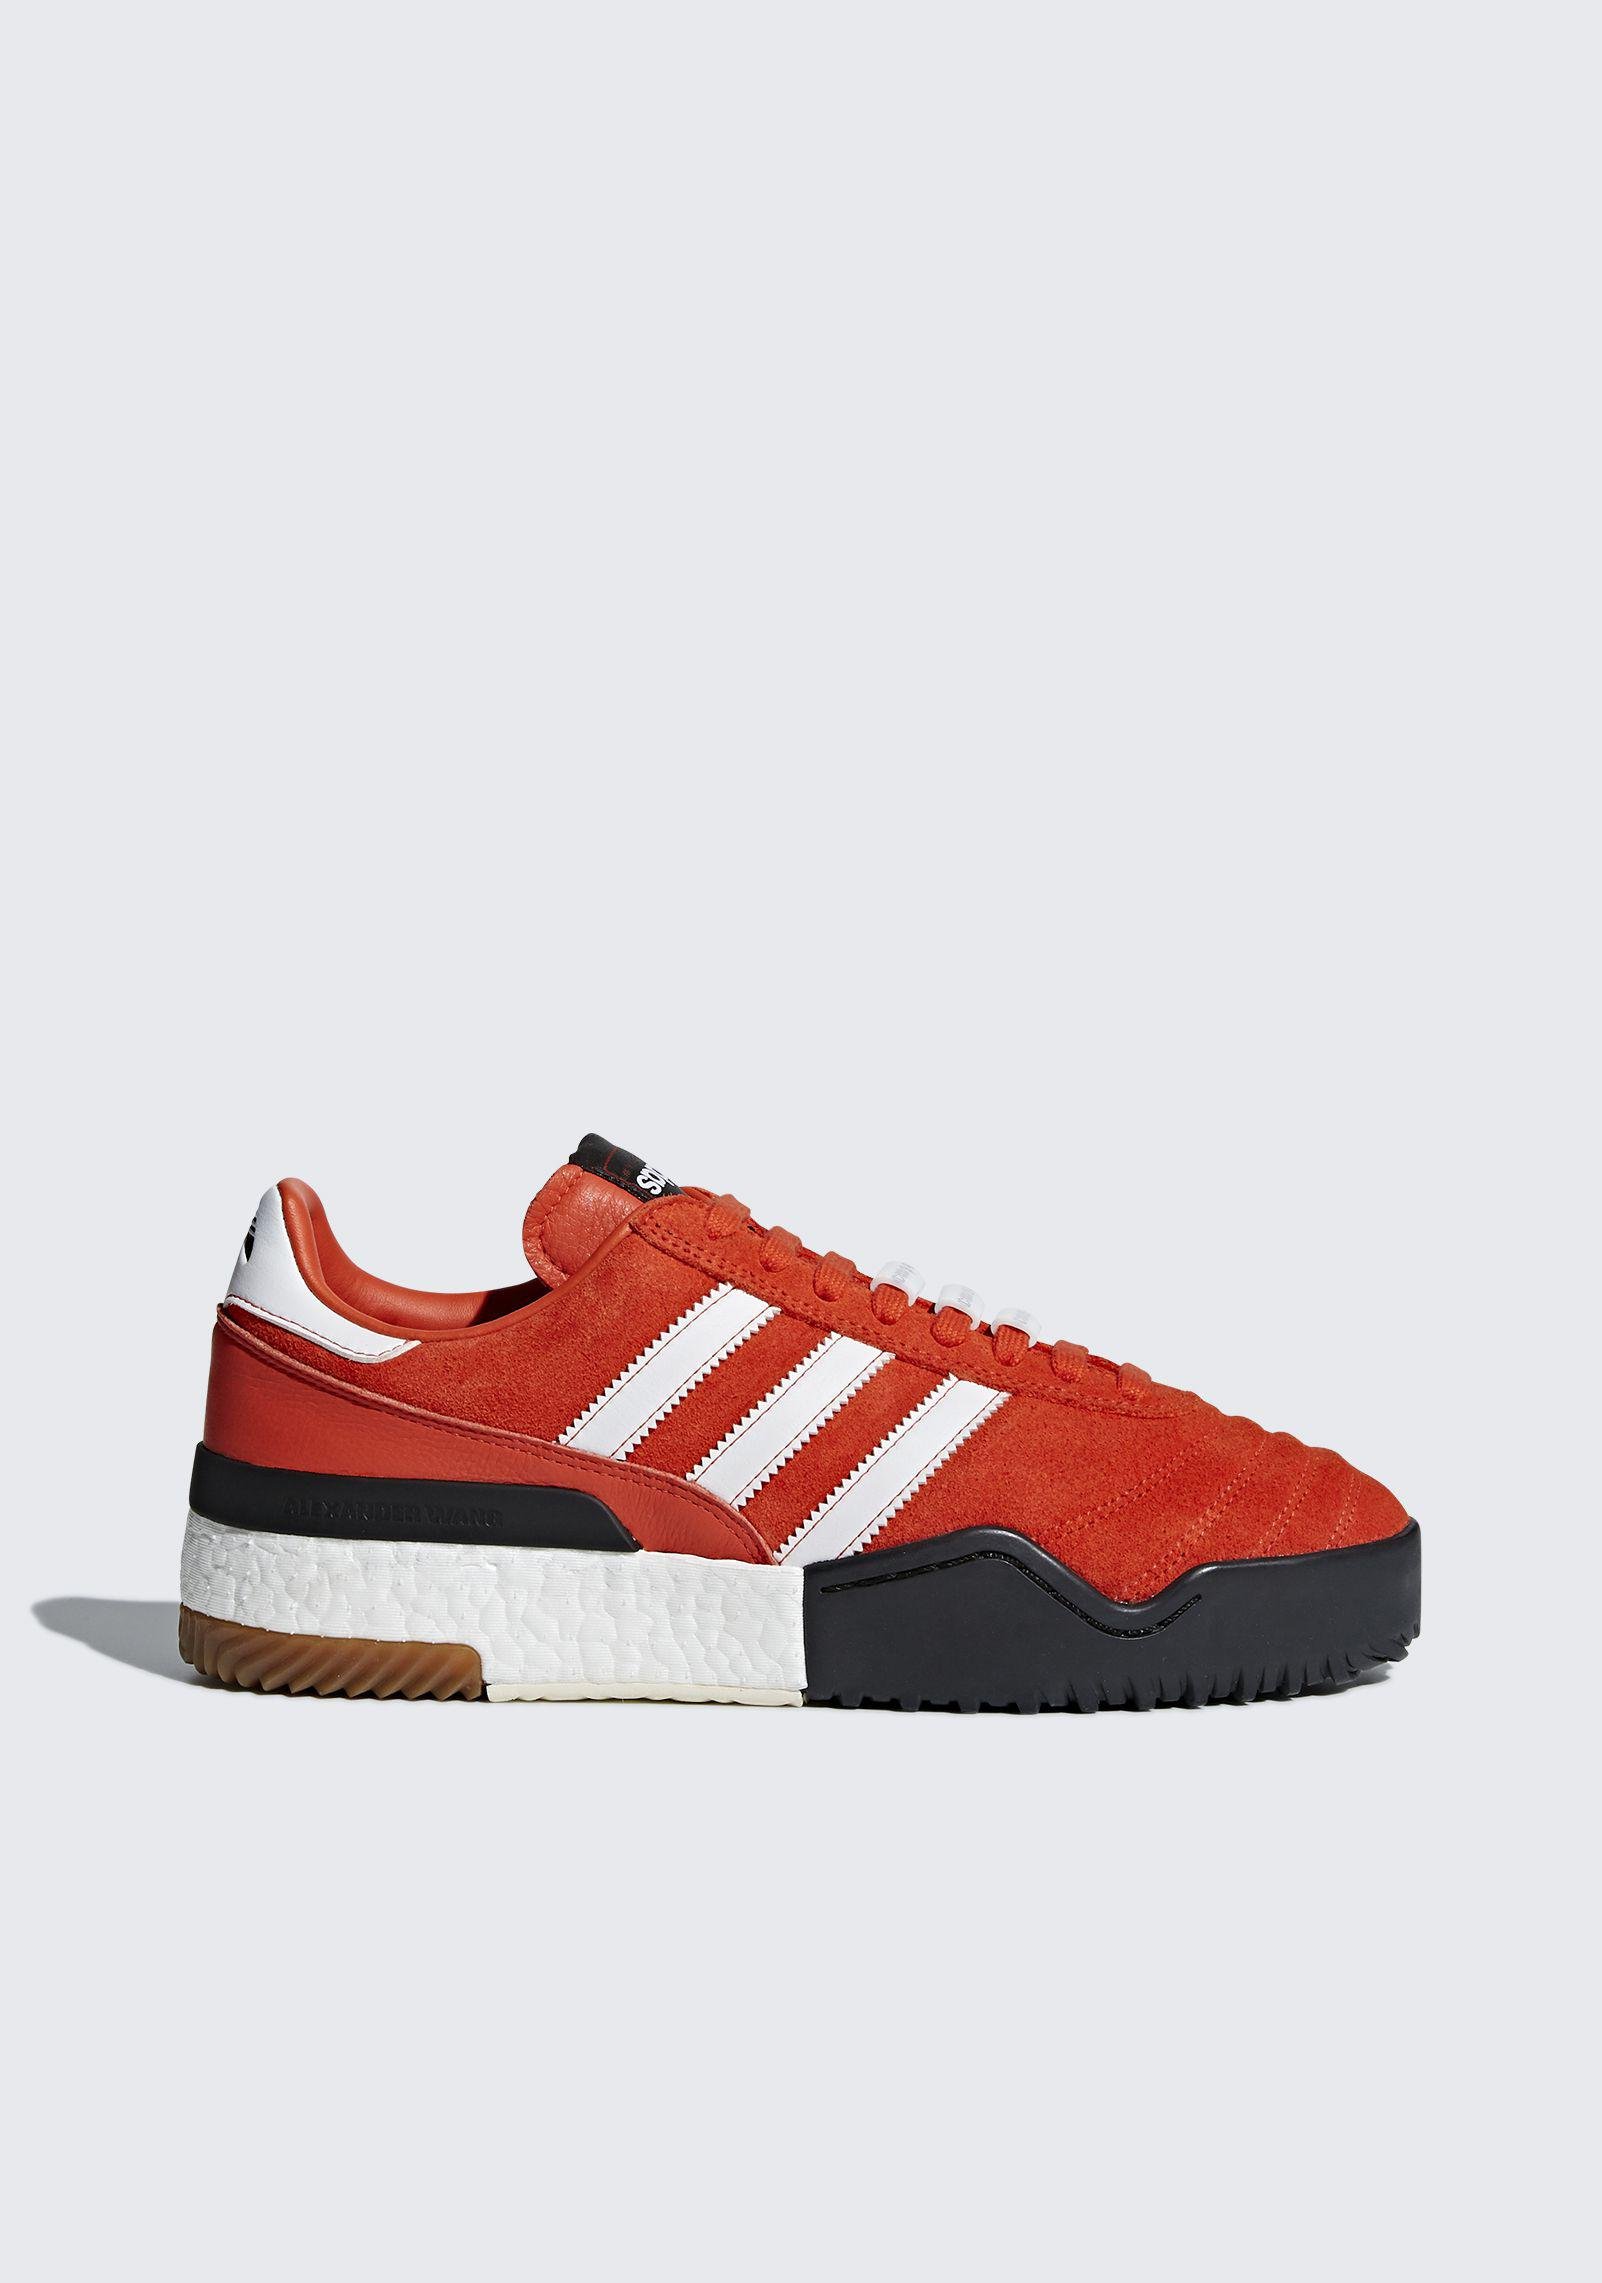 Alexander Wang Adidas Originals By Aw Bball Soccer Shoes in Red | Lyst